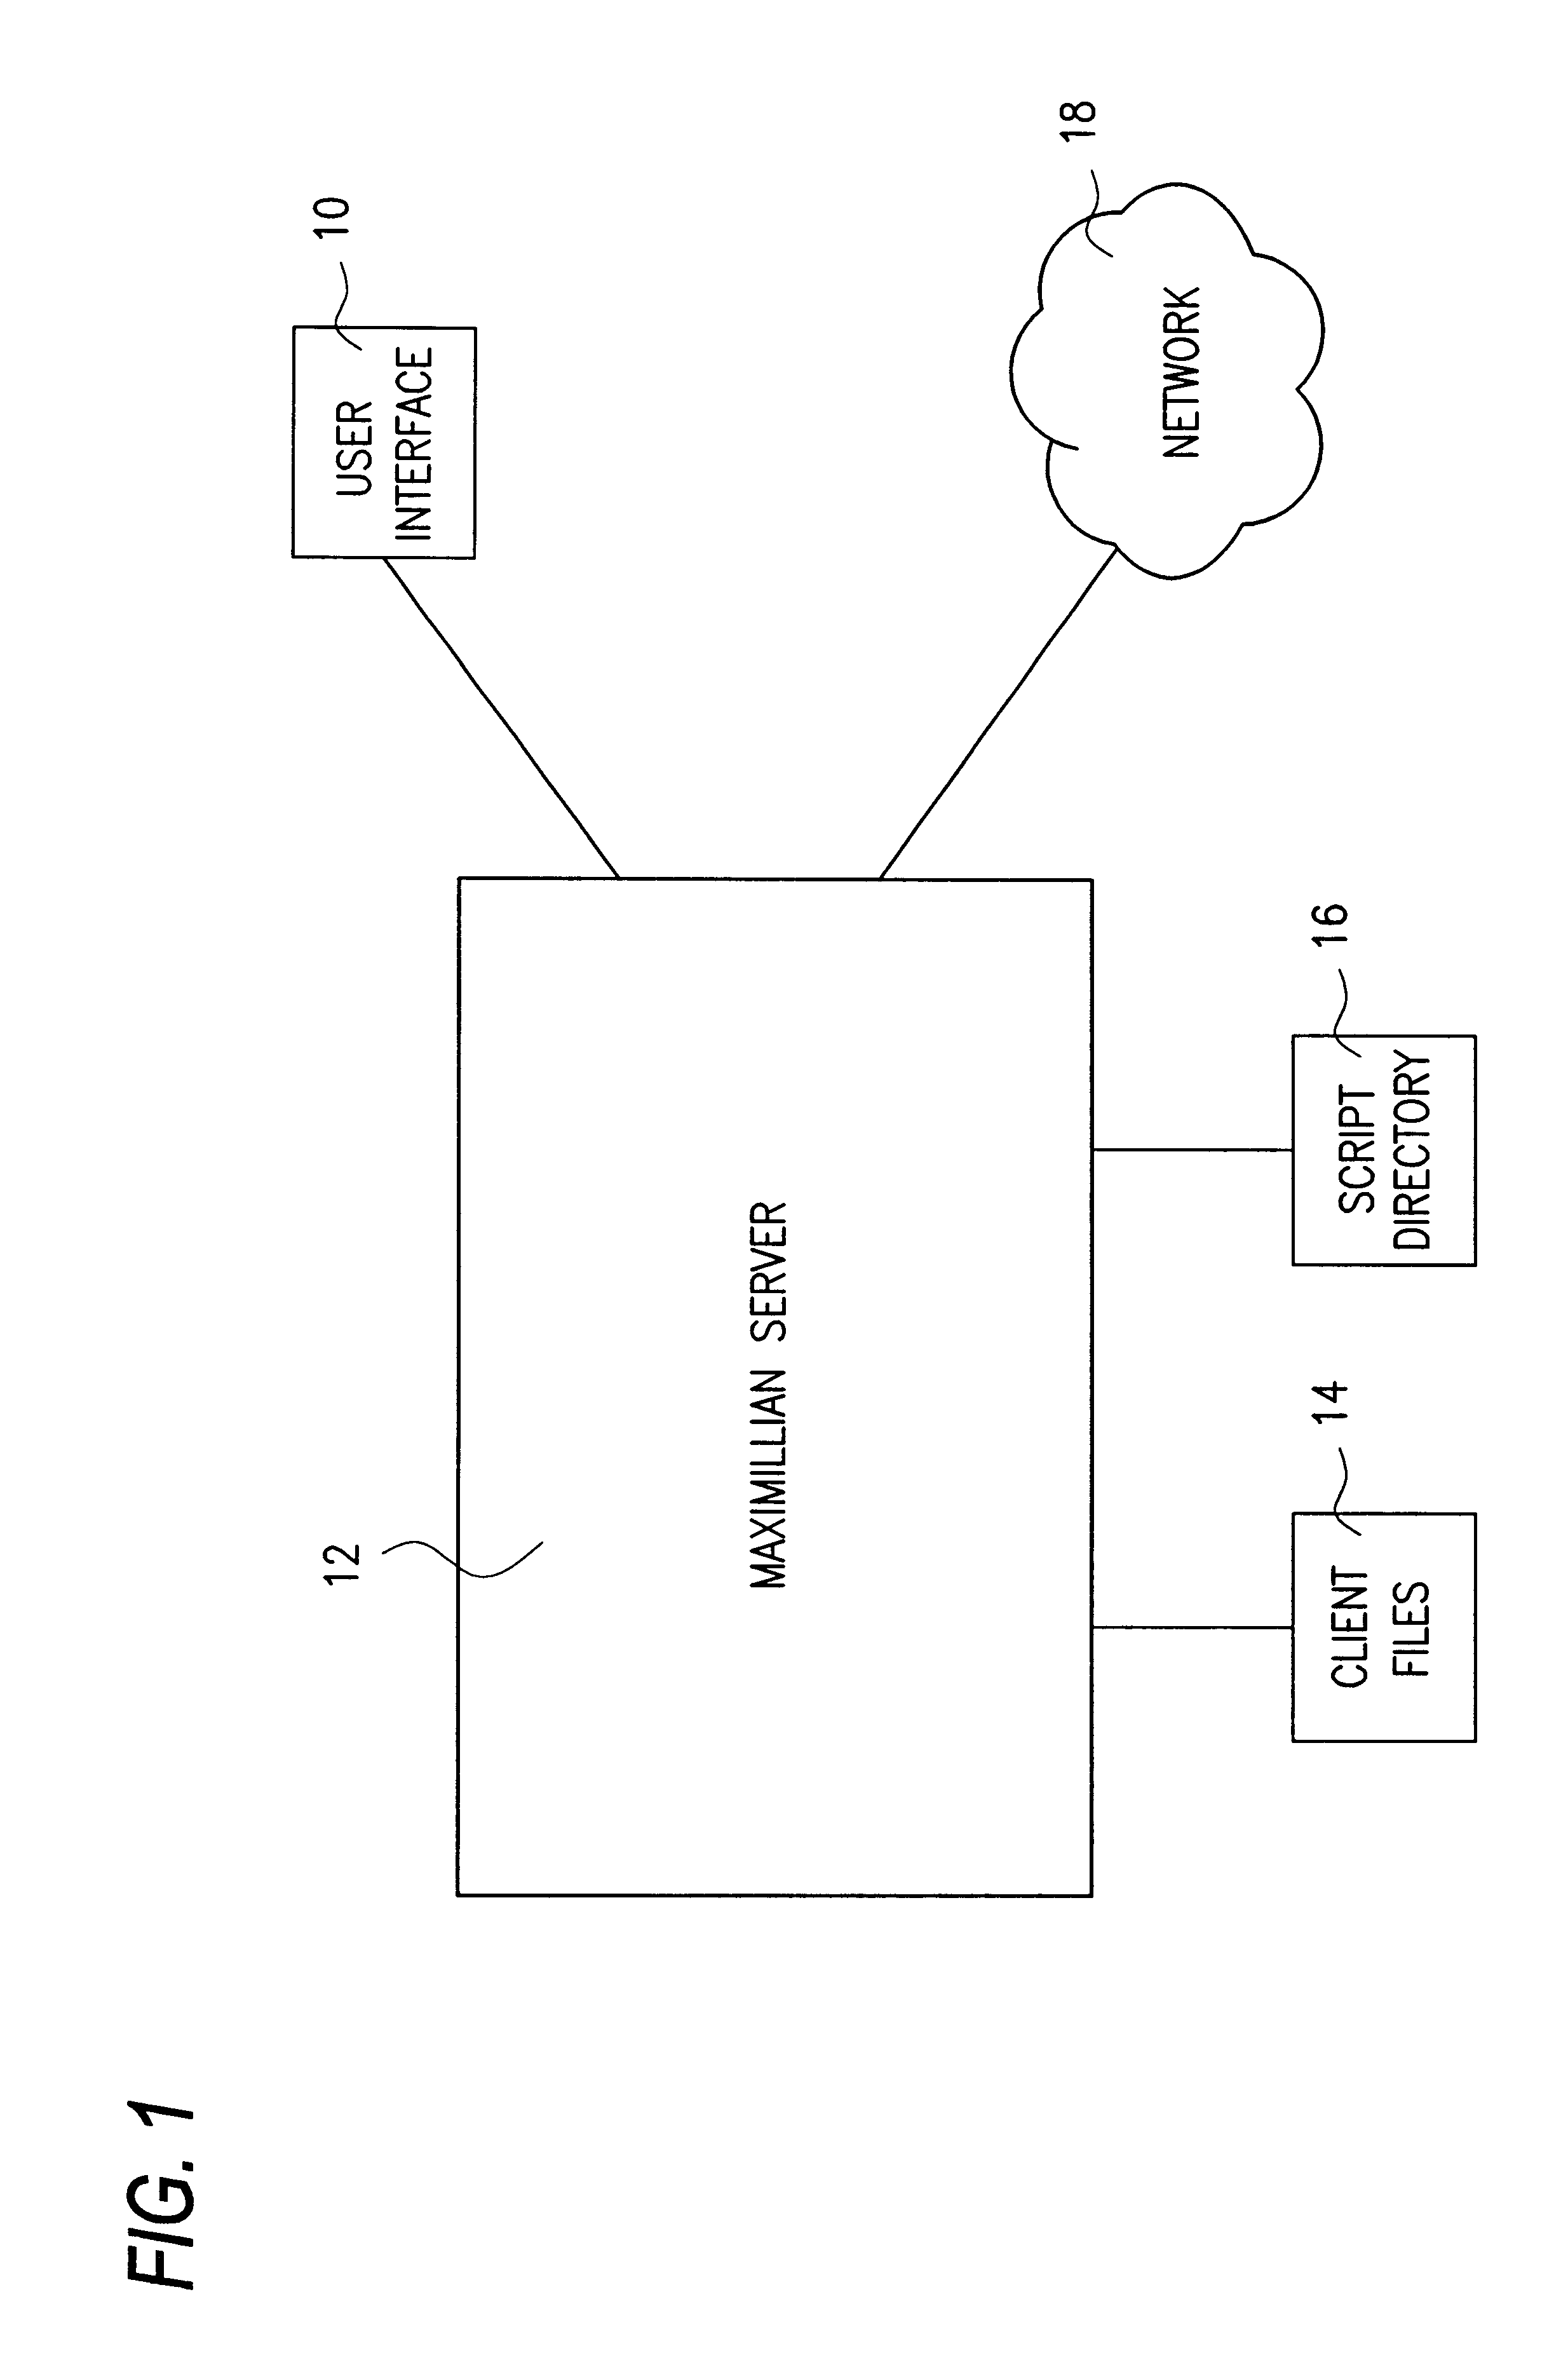 Apparatus and method of implementing fast internet real-time search technology (first)